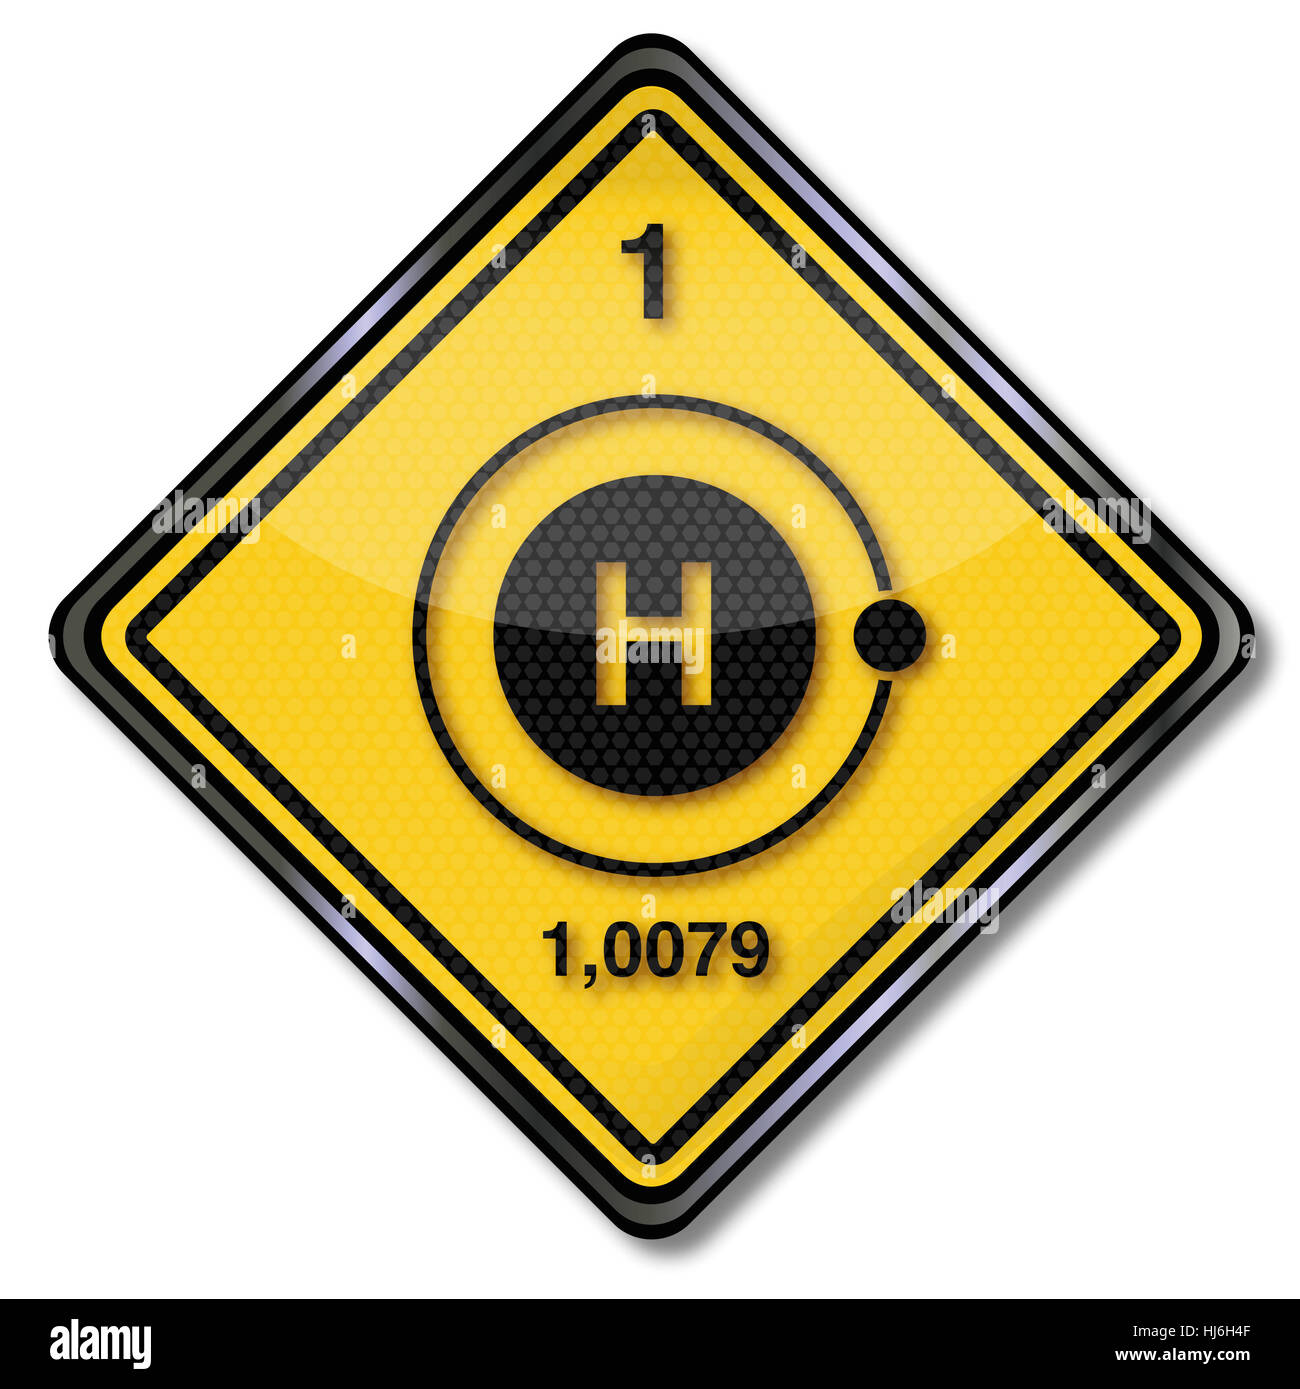 chemistry characters hydrogen atom Stock Photo